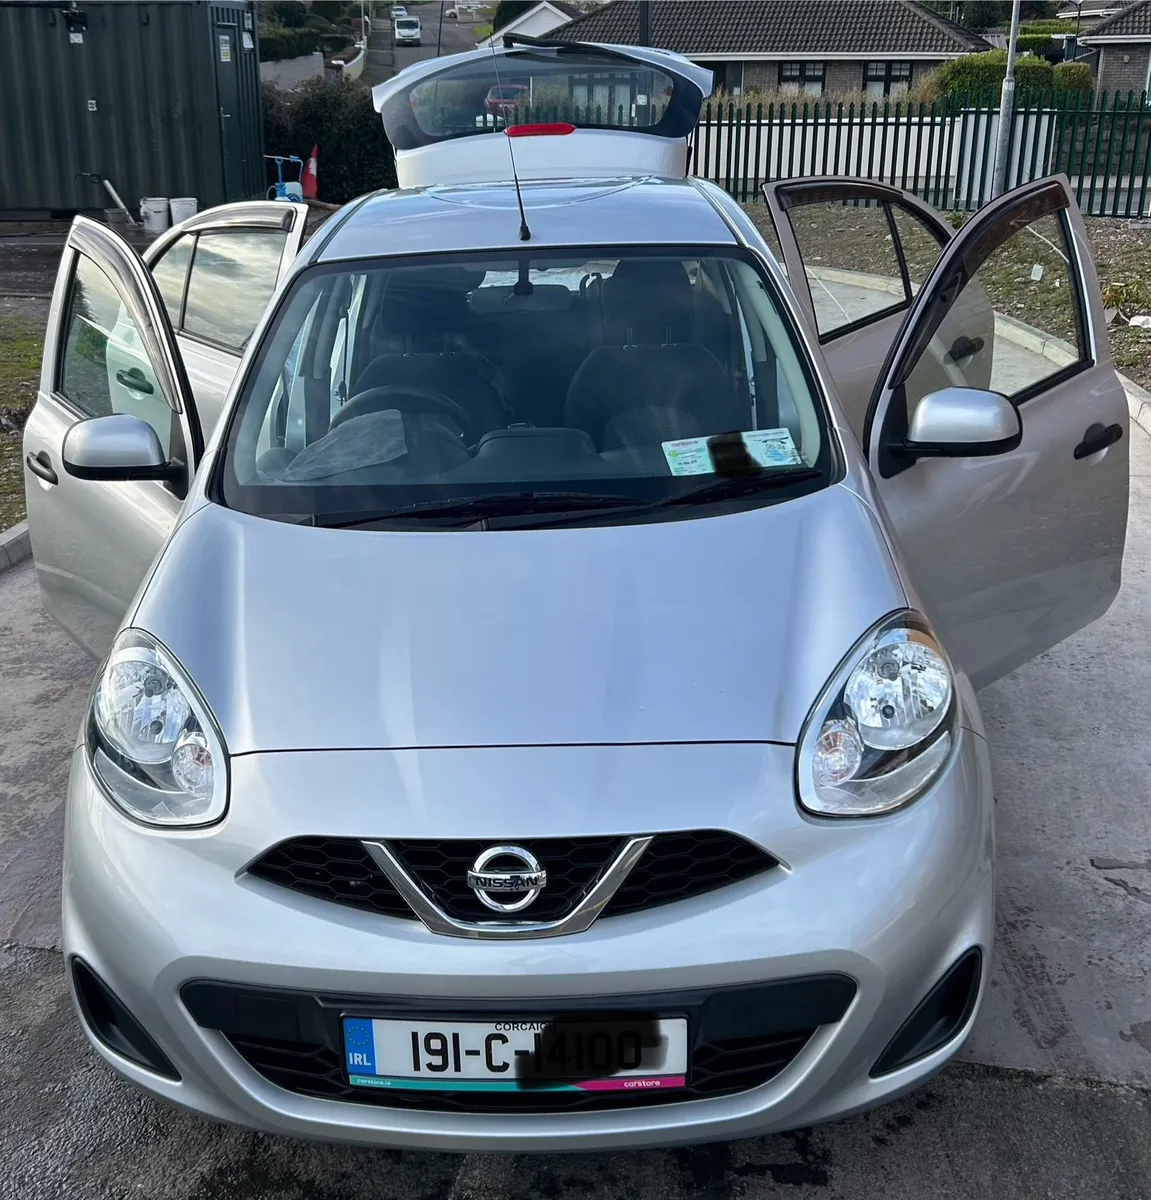 Nissan March 1.2 Auto - NCT&TAX - Fully Serviced